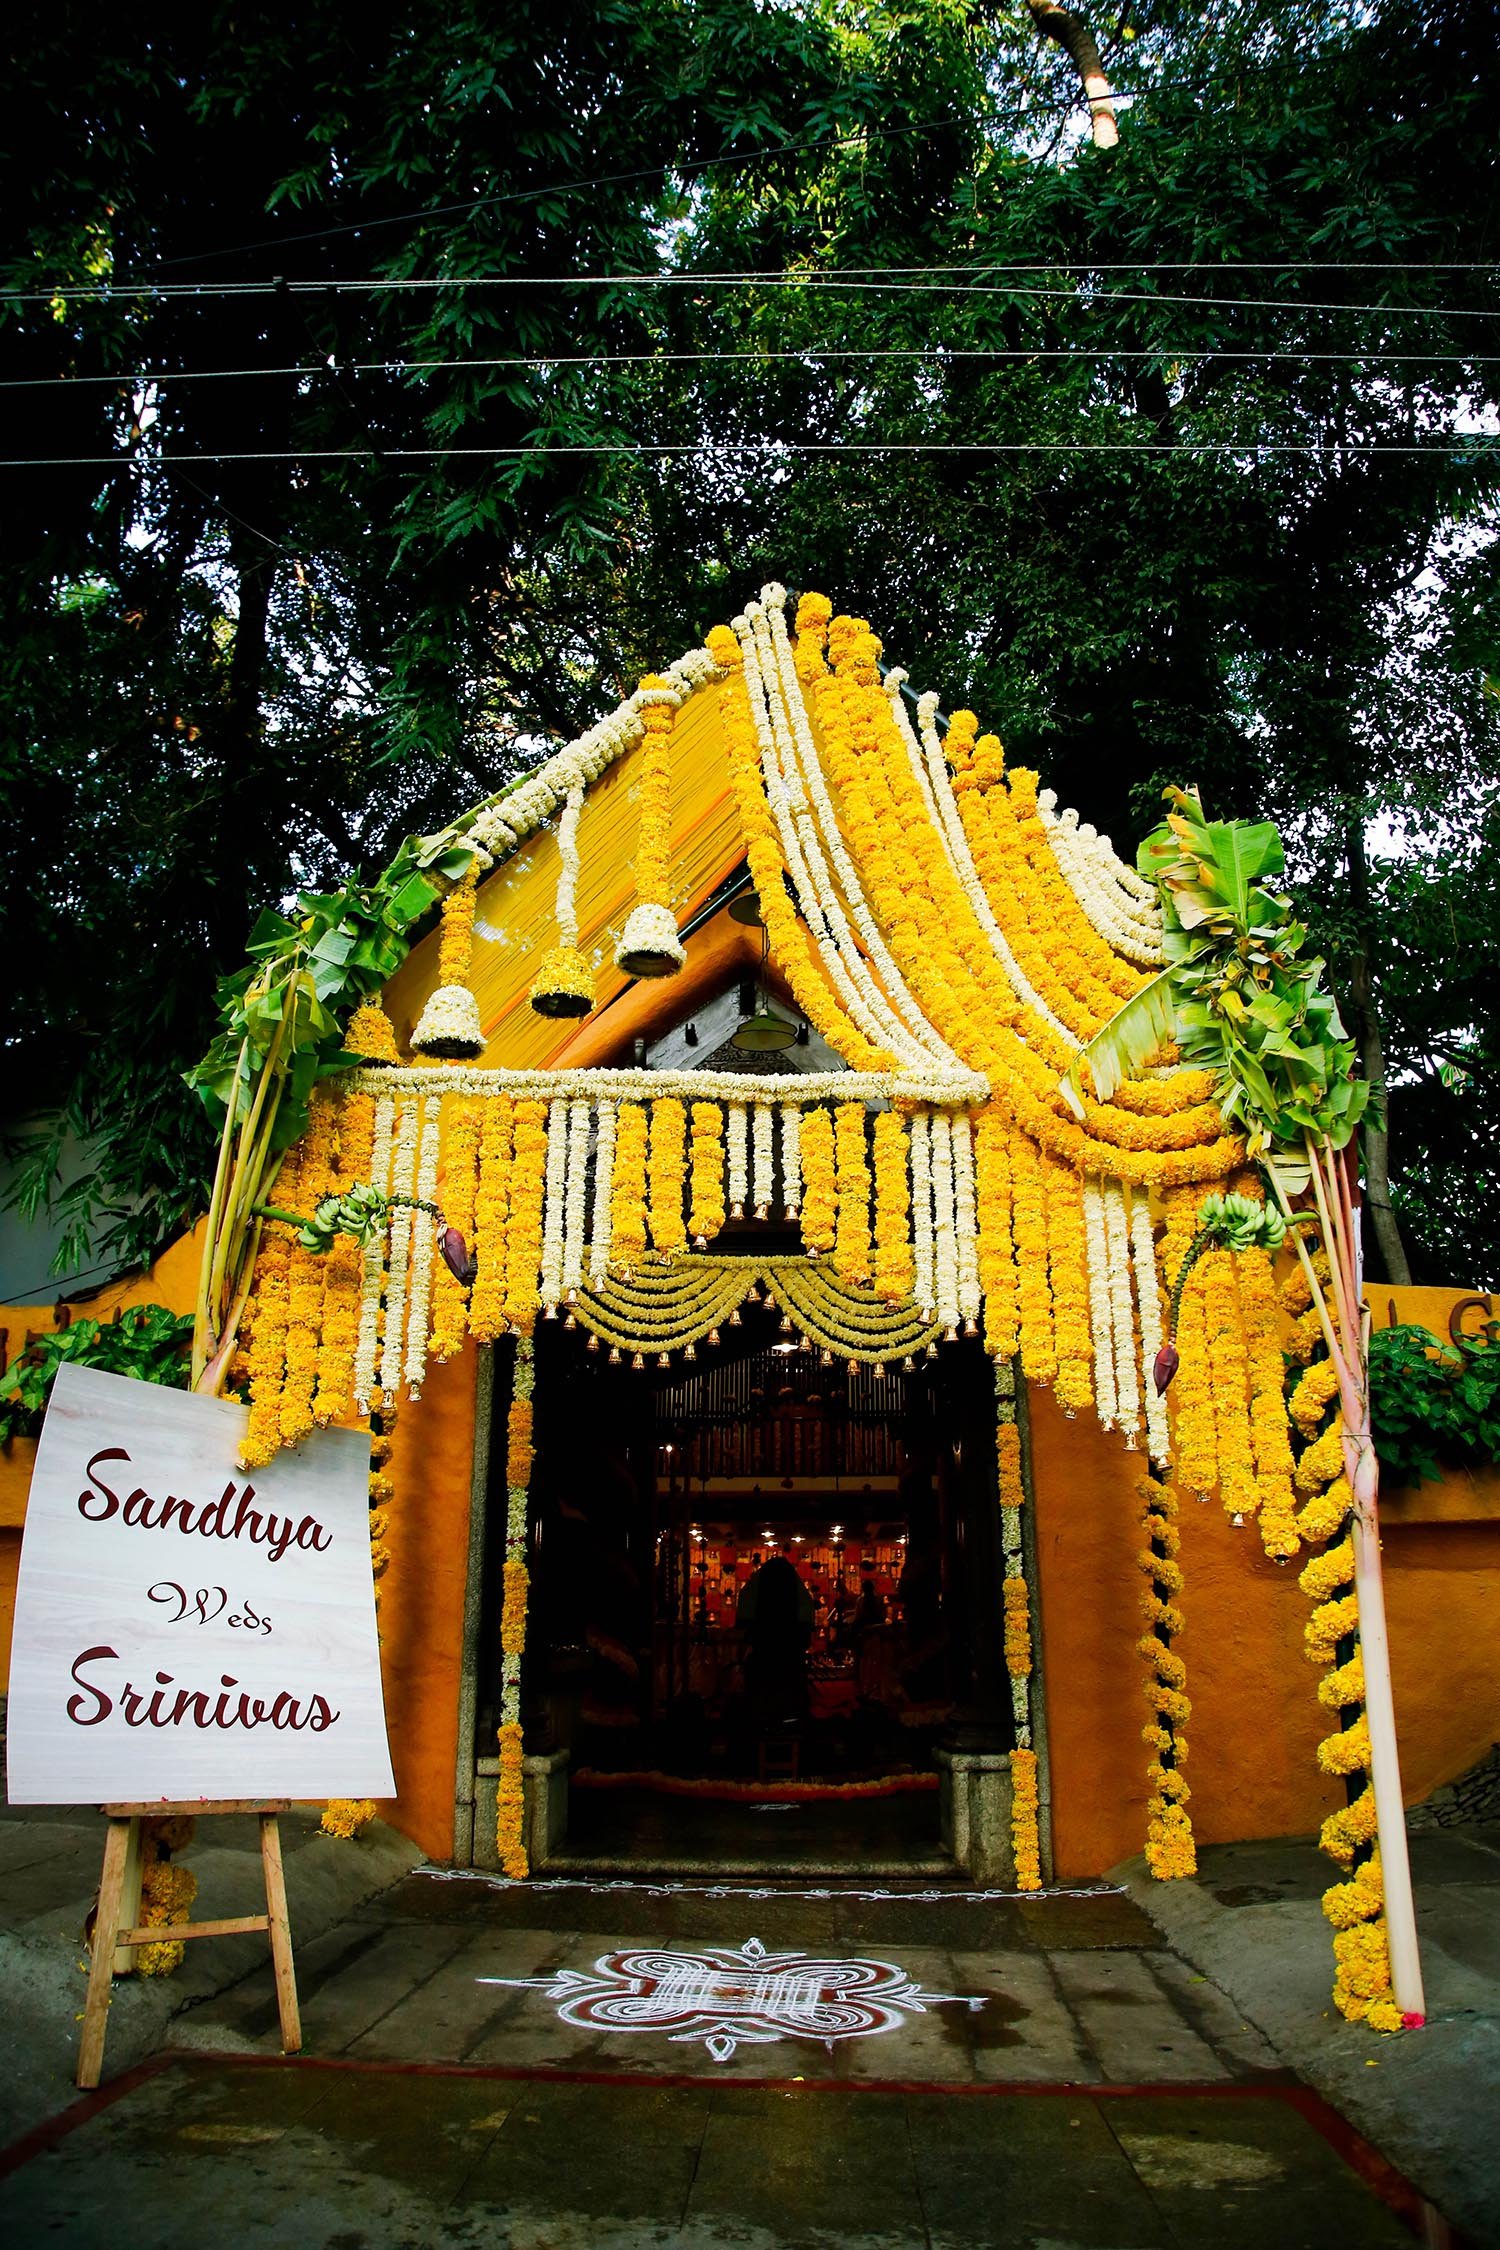 Entrance of Ganjam Mantapa Bangalore decorated with white and yellow flower garlands